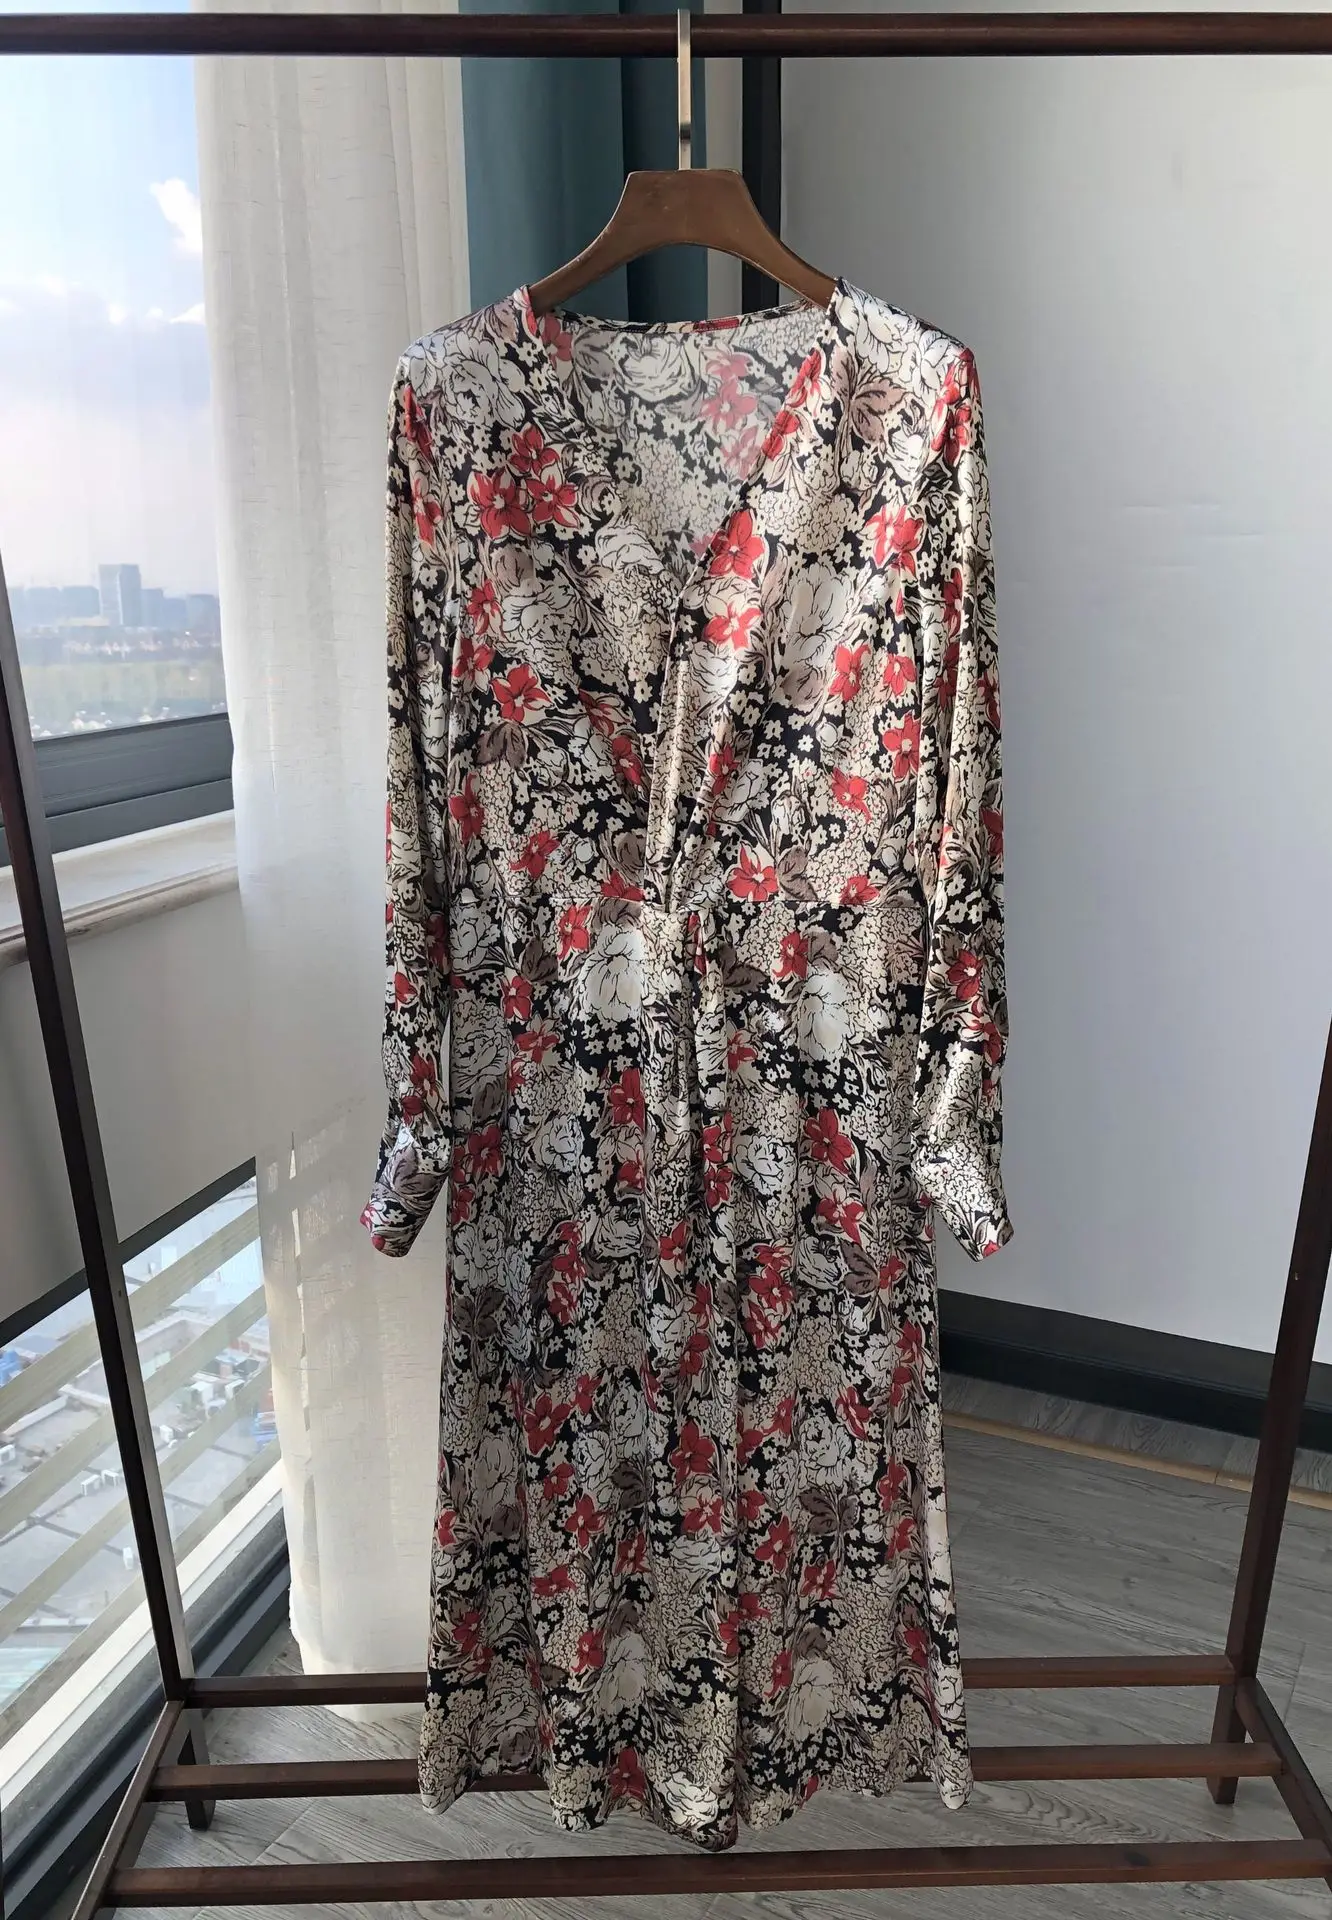 

V-Neck Dress Women's 100% Viscose Floral Print Smooth Long Sleeve Lady Long Dress for Early Autumn